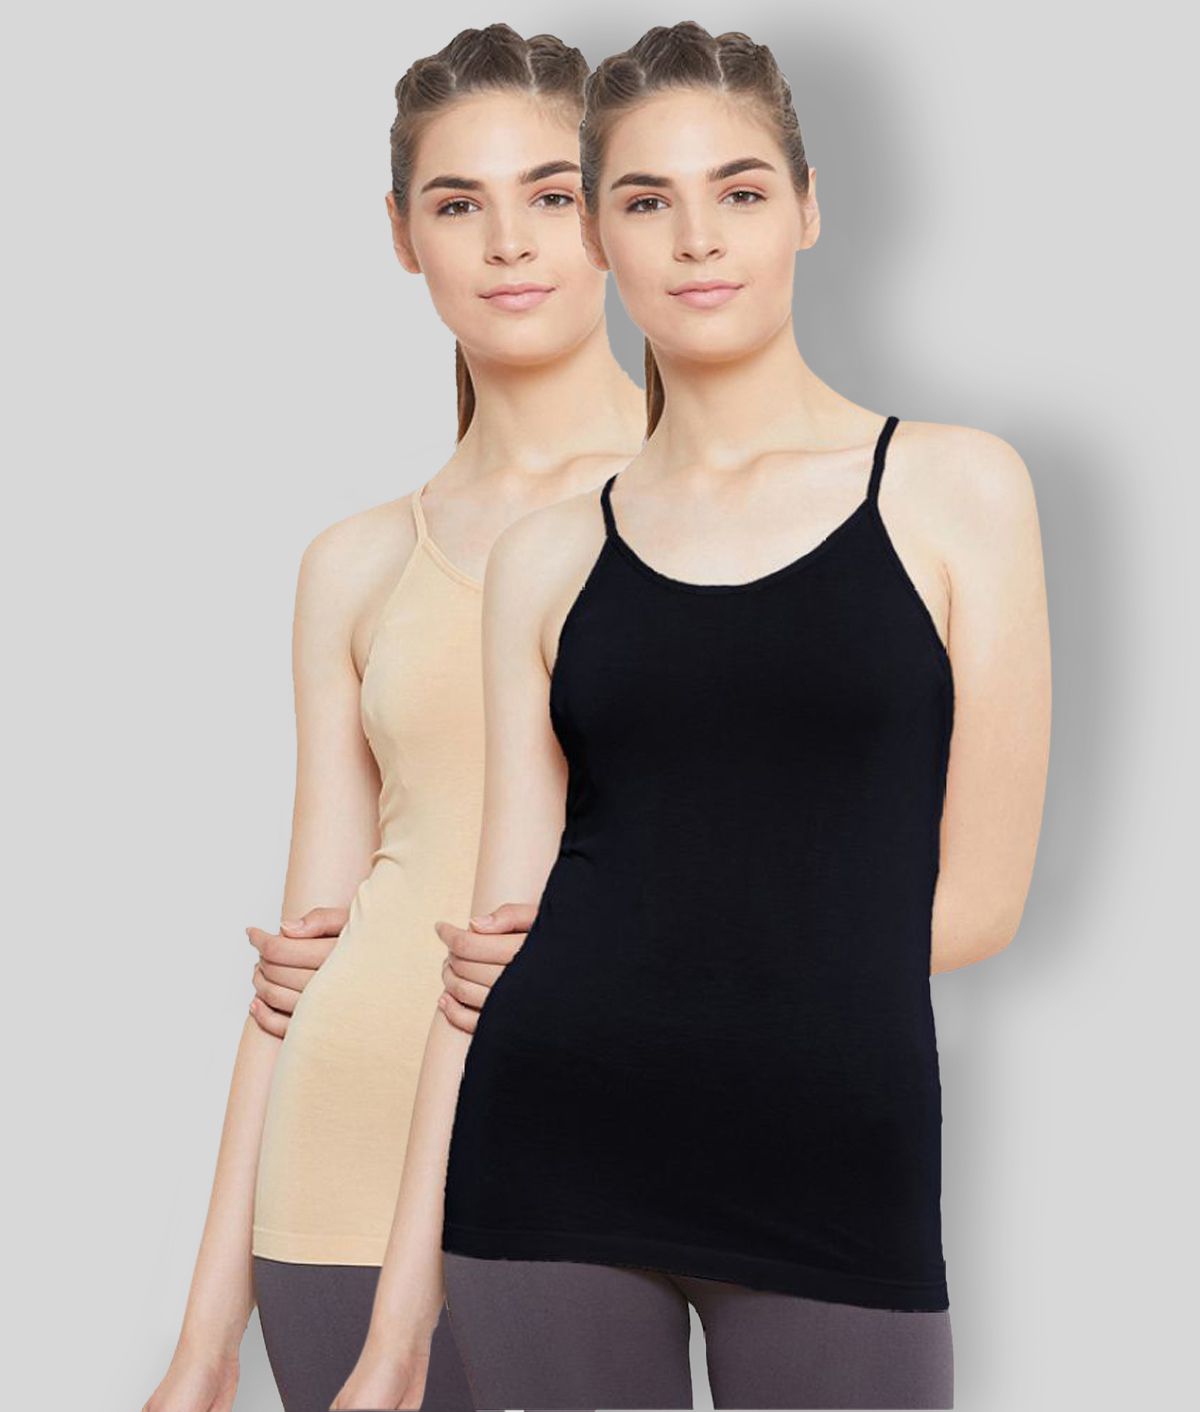     			Outflits Cotton Shaping Camisols Shapewear - Pack of 2